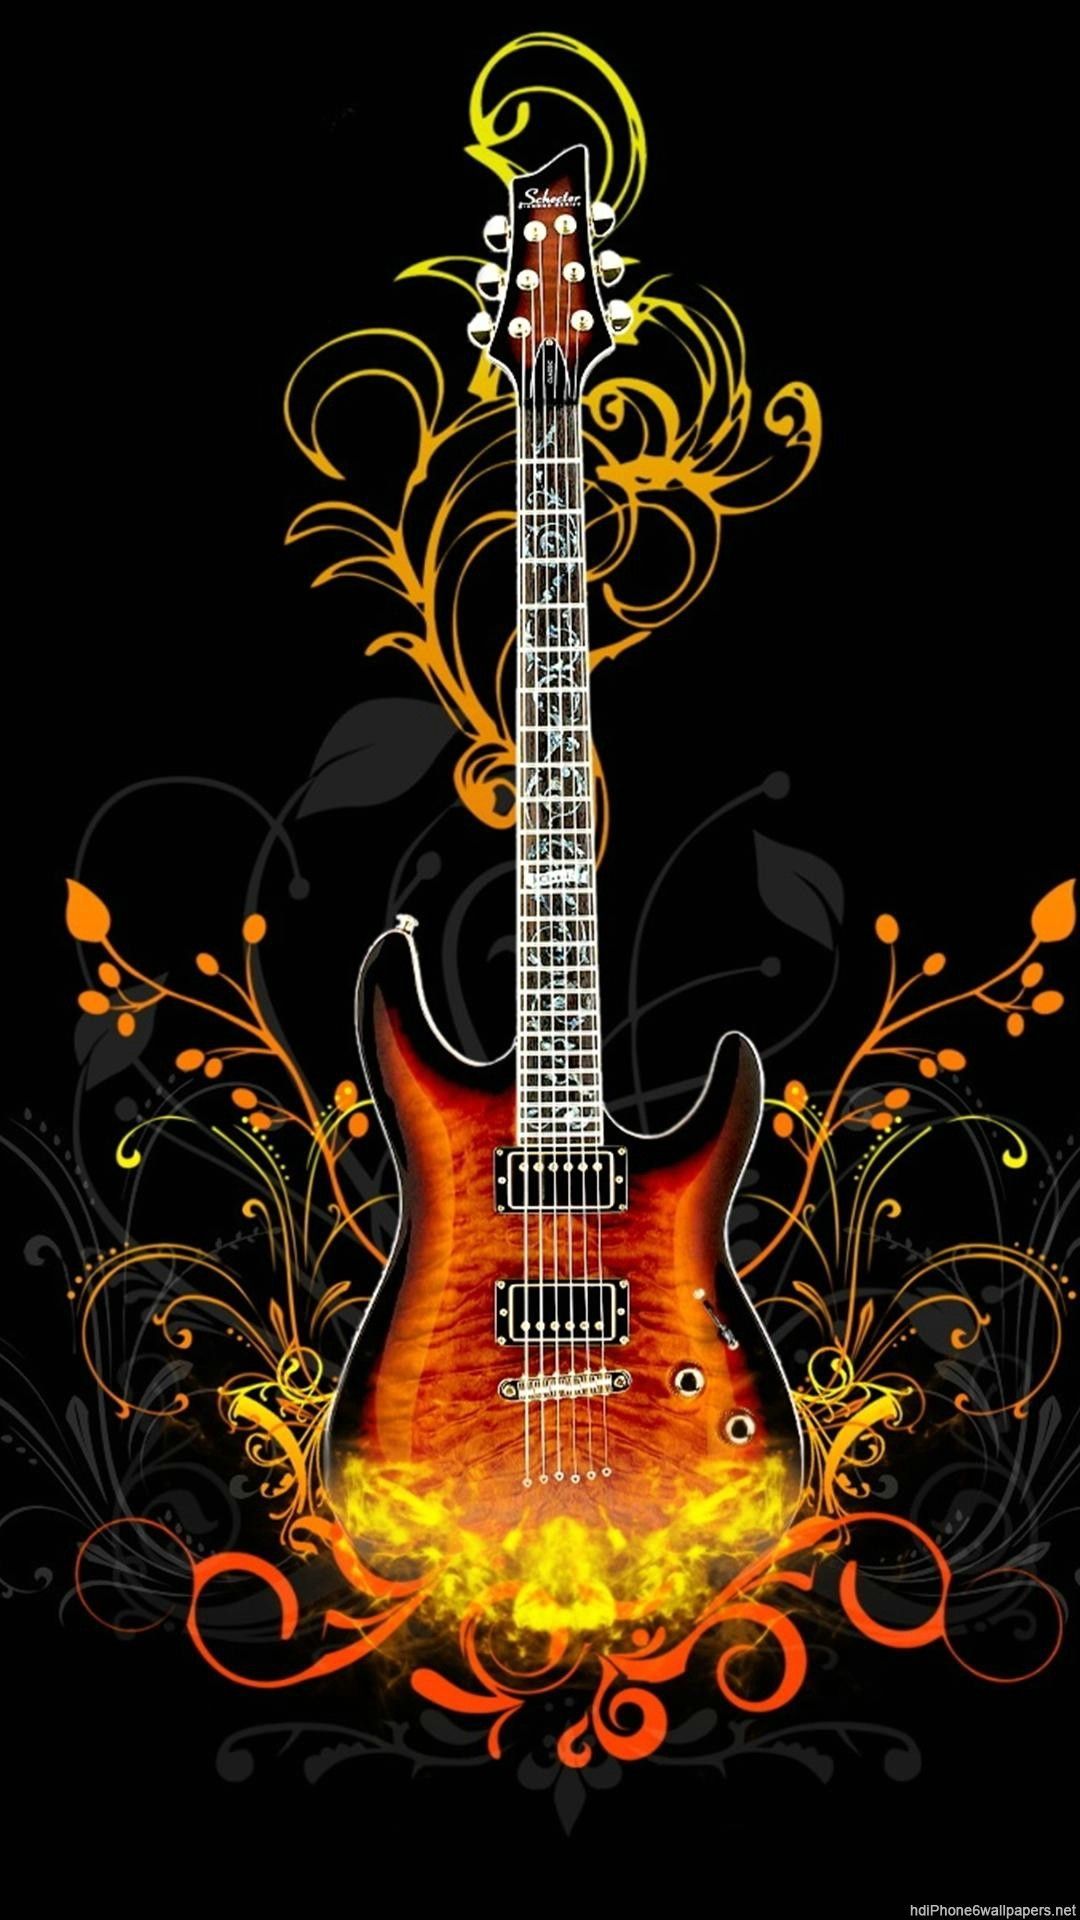 1080x1920 abstract guitar iPhone 6 wallpaper HD Plus background. Guitar, Music wallpaper, Guitar wall art